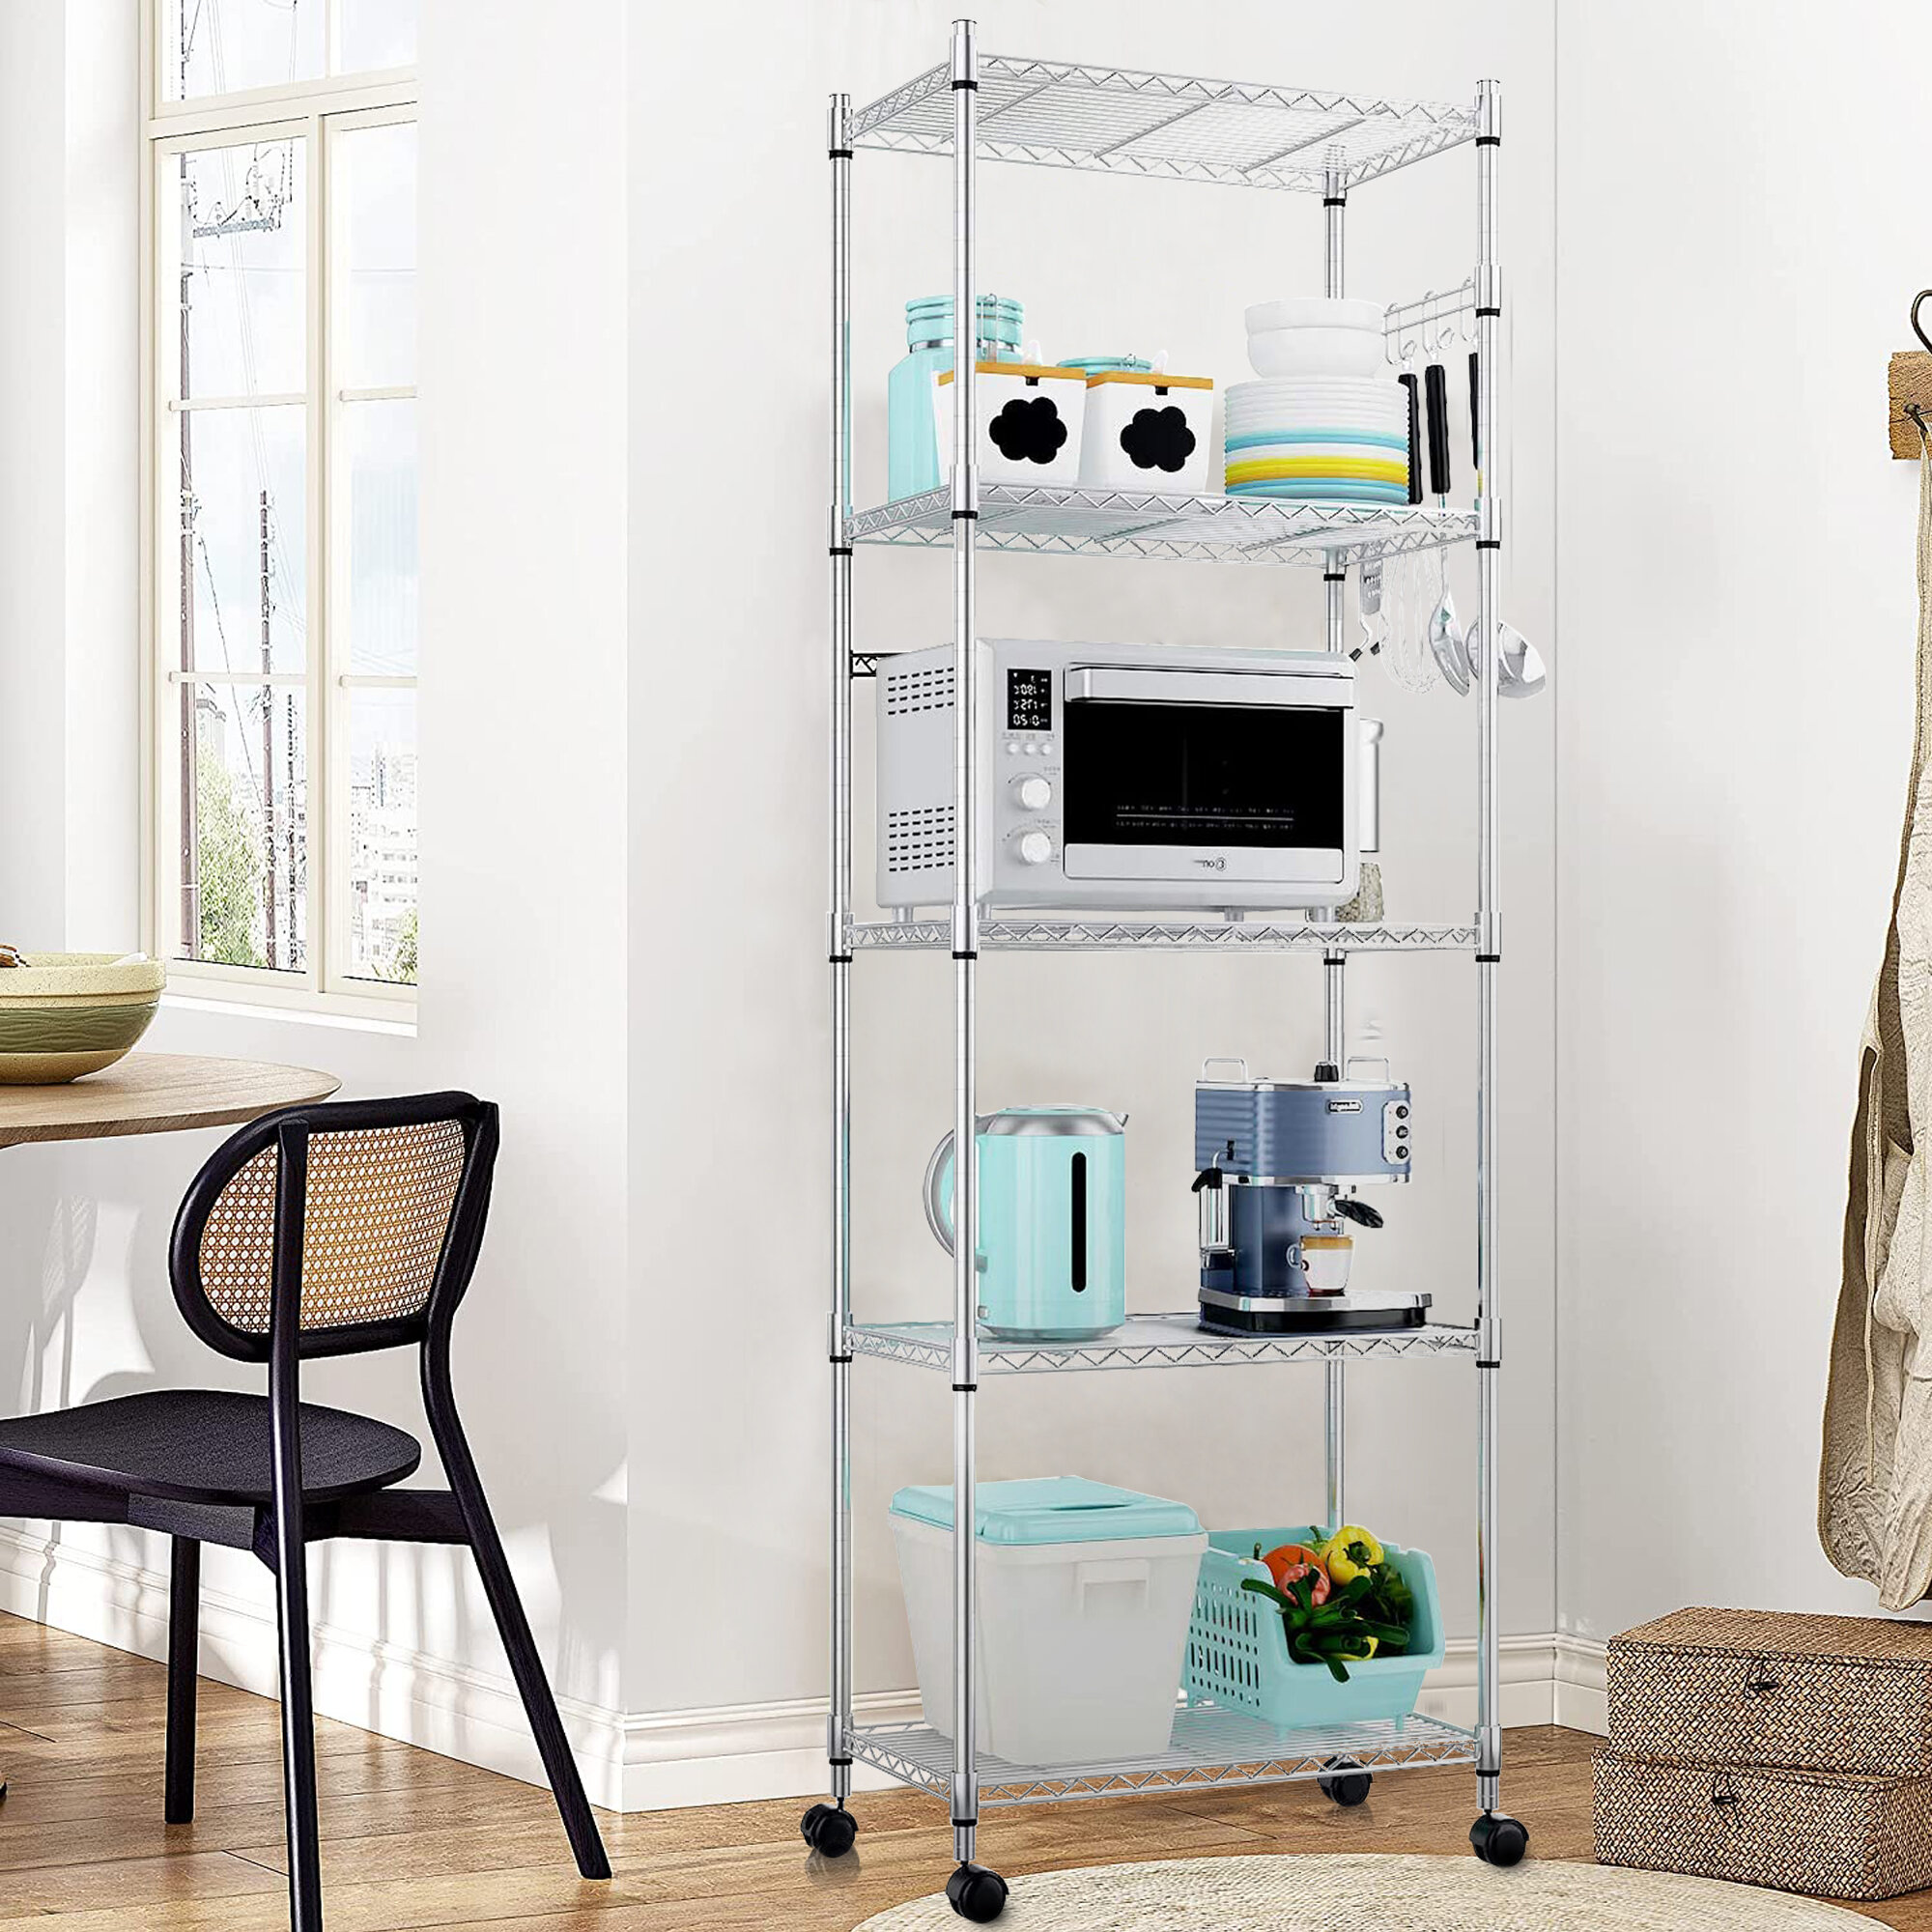 Seville Classics UltraDurable Commercial-Grade 5-Tier NSF-Certified Wire Shelving with Wheels, 36 W x 18 D, Plated Steel